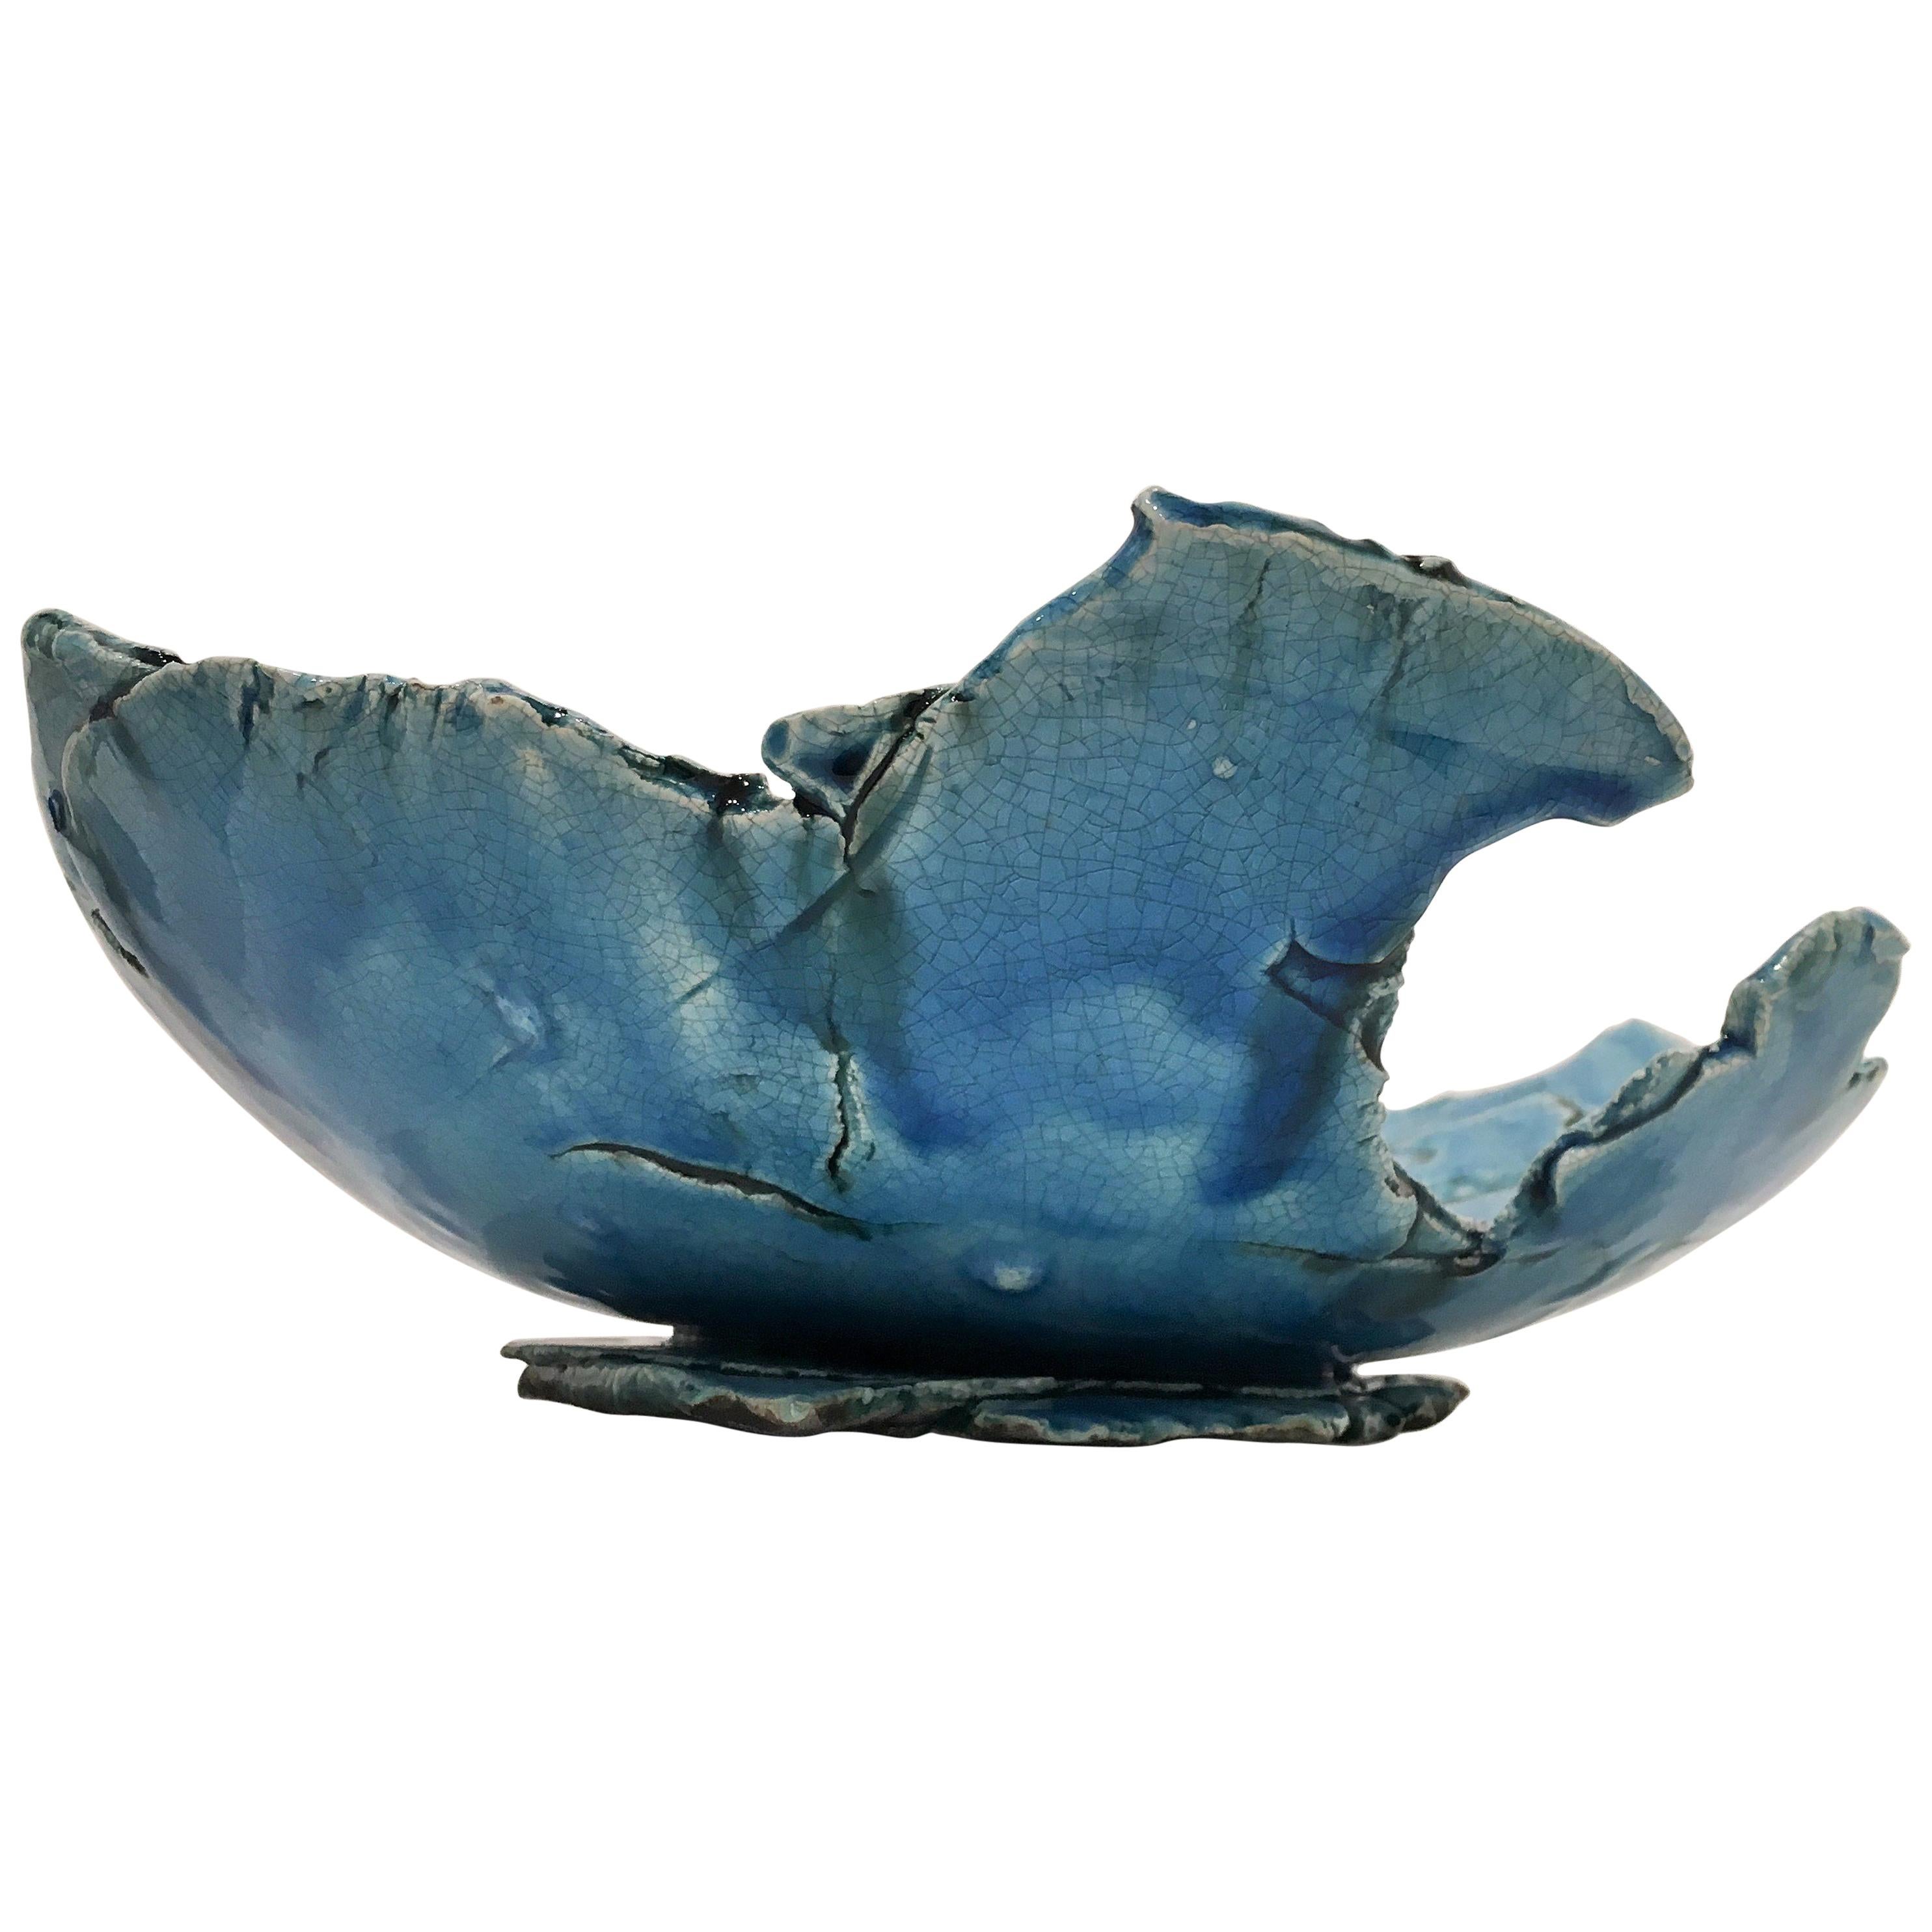 Contemporary Ceramic Bowl by Stacey H. Hammond